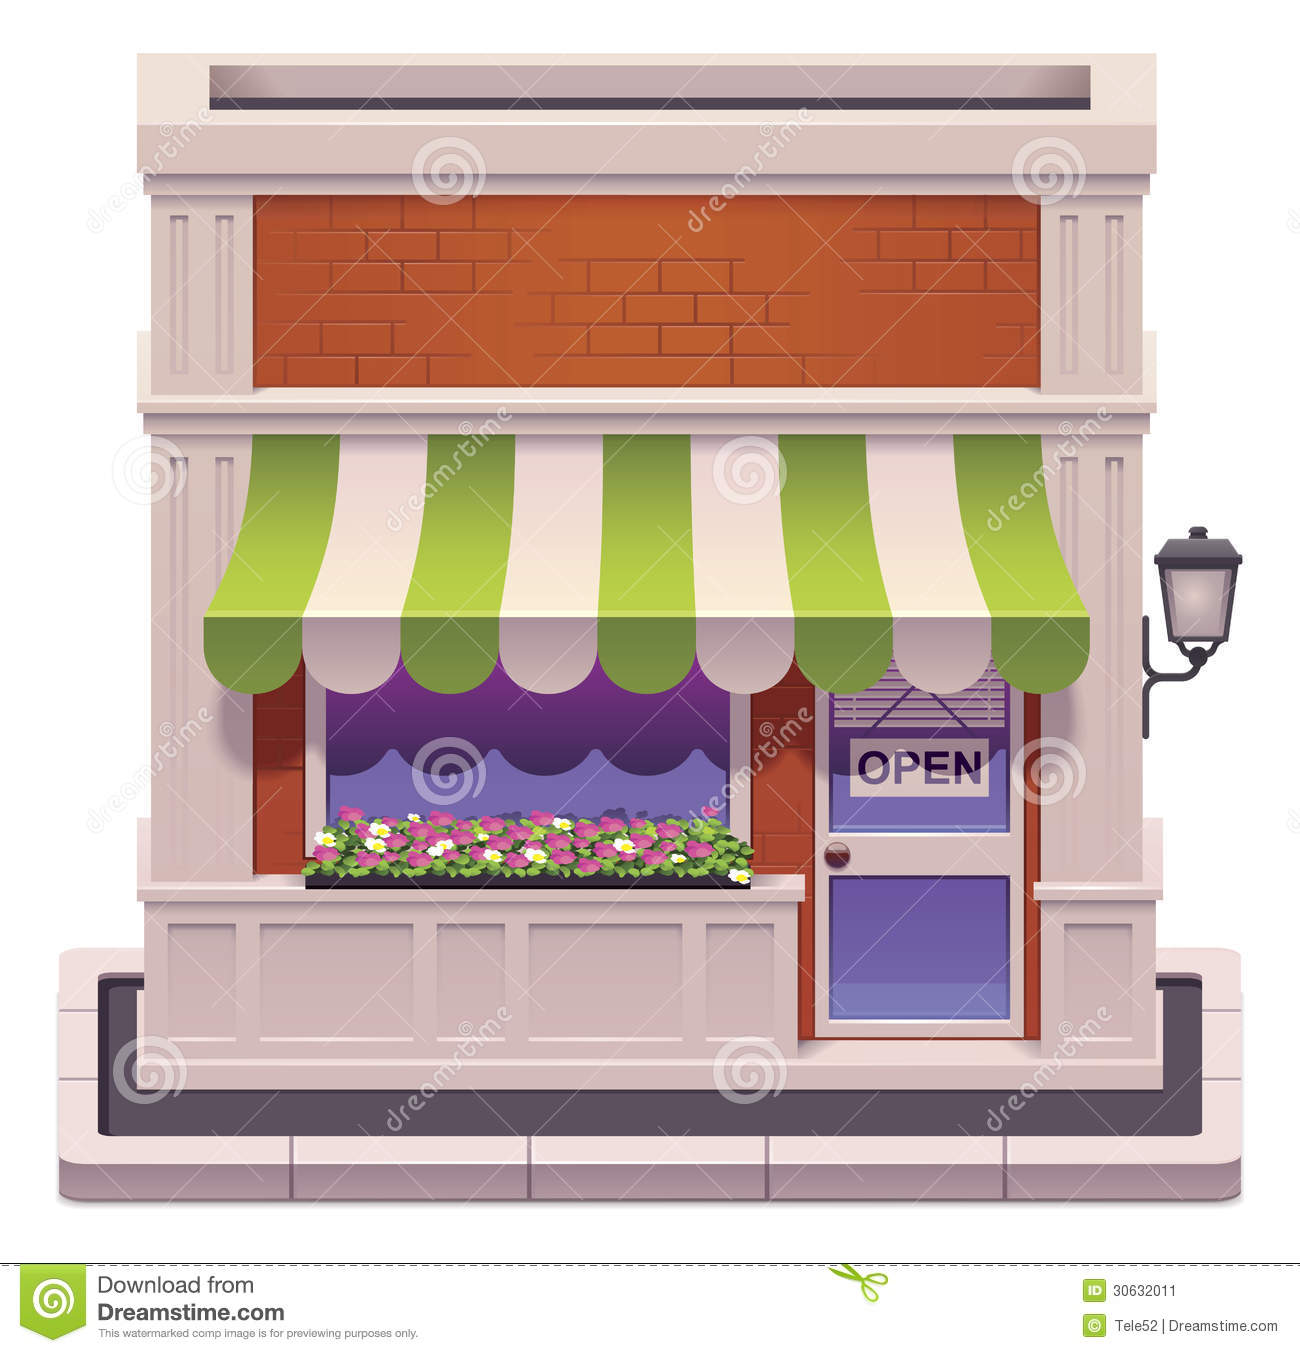 Detailed Icon Representing Shop Building With Awnings